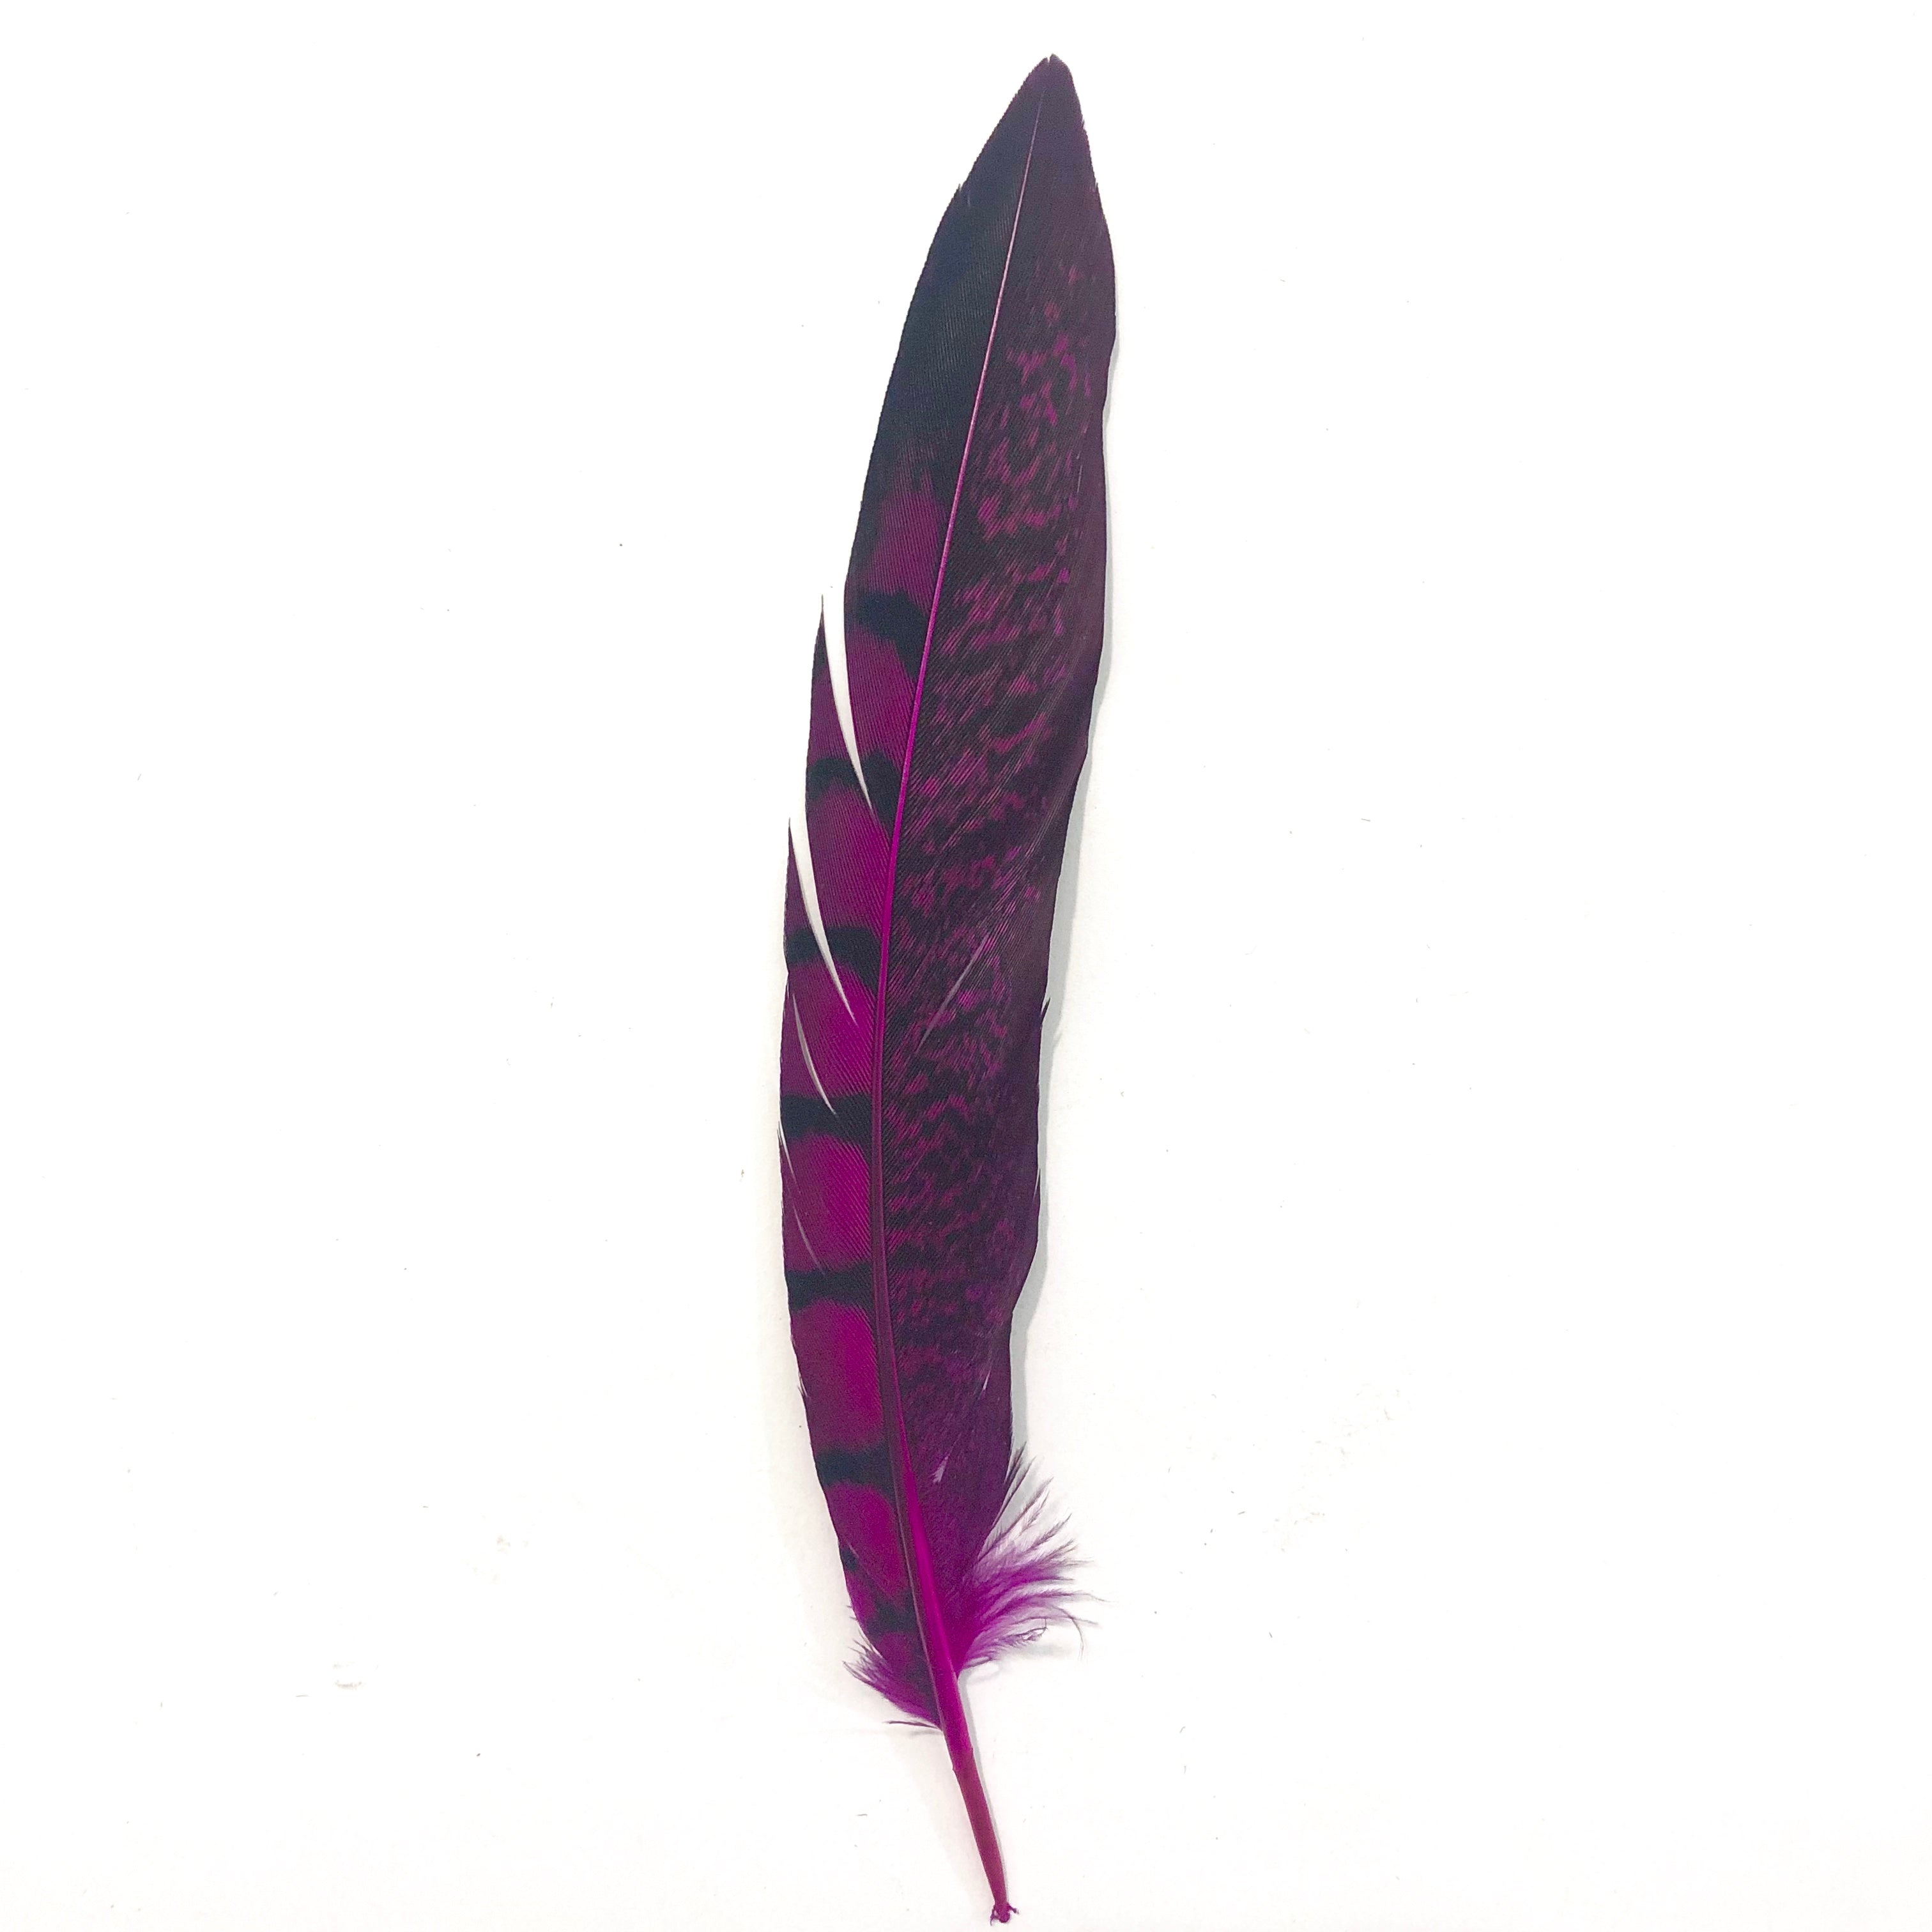 5" to 10" Lady Amherst Pheasant Side Tail Feather x 10 pcs - Cerise